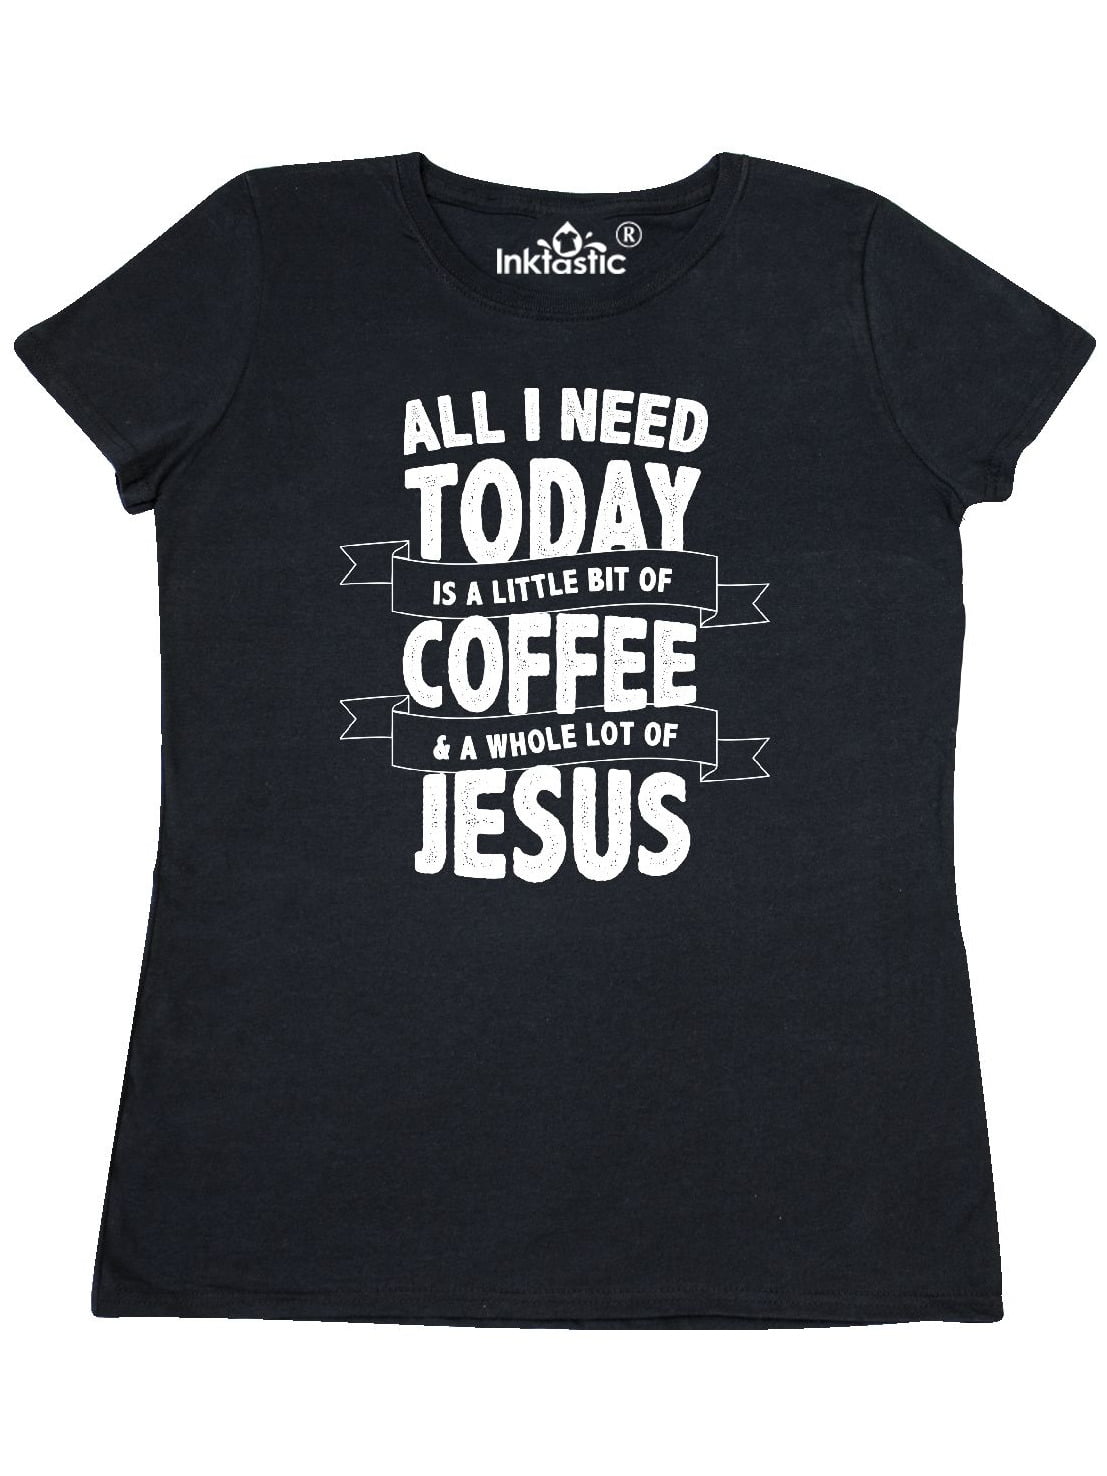 All I Need Today Is A Little Bit Of Coffee And Whole Lot Of Jesus 26 Customized Handmade T-shirt 100/% Cotton